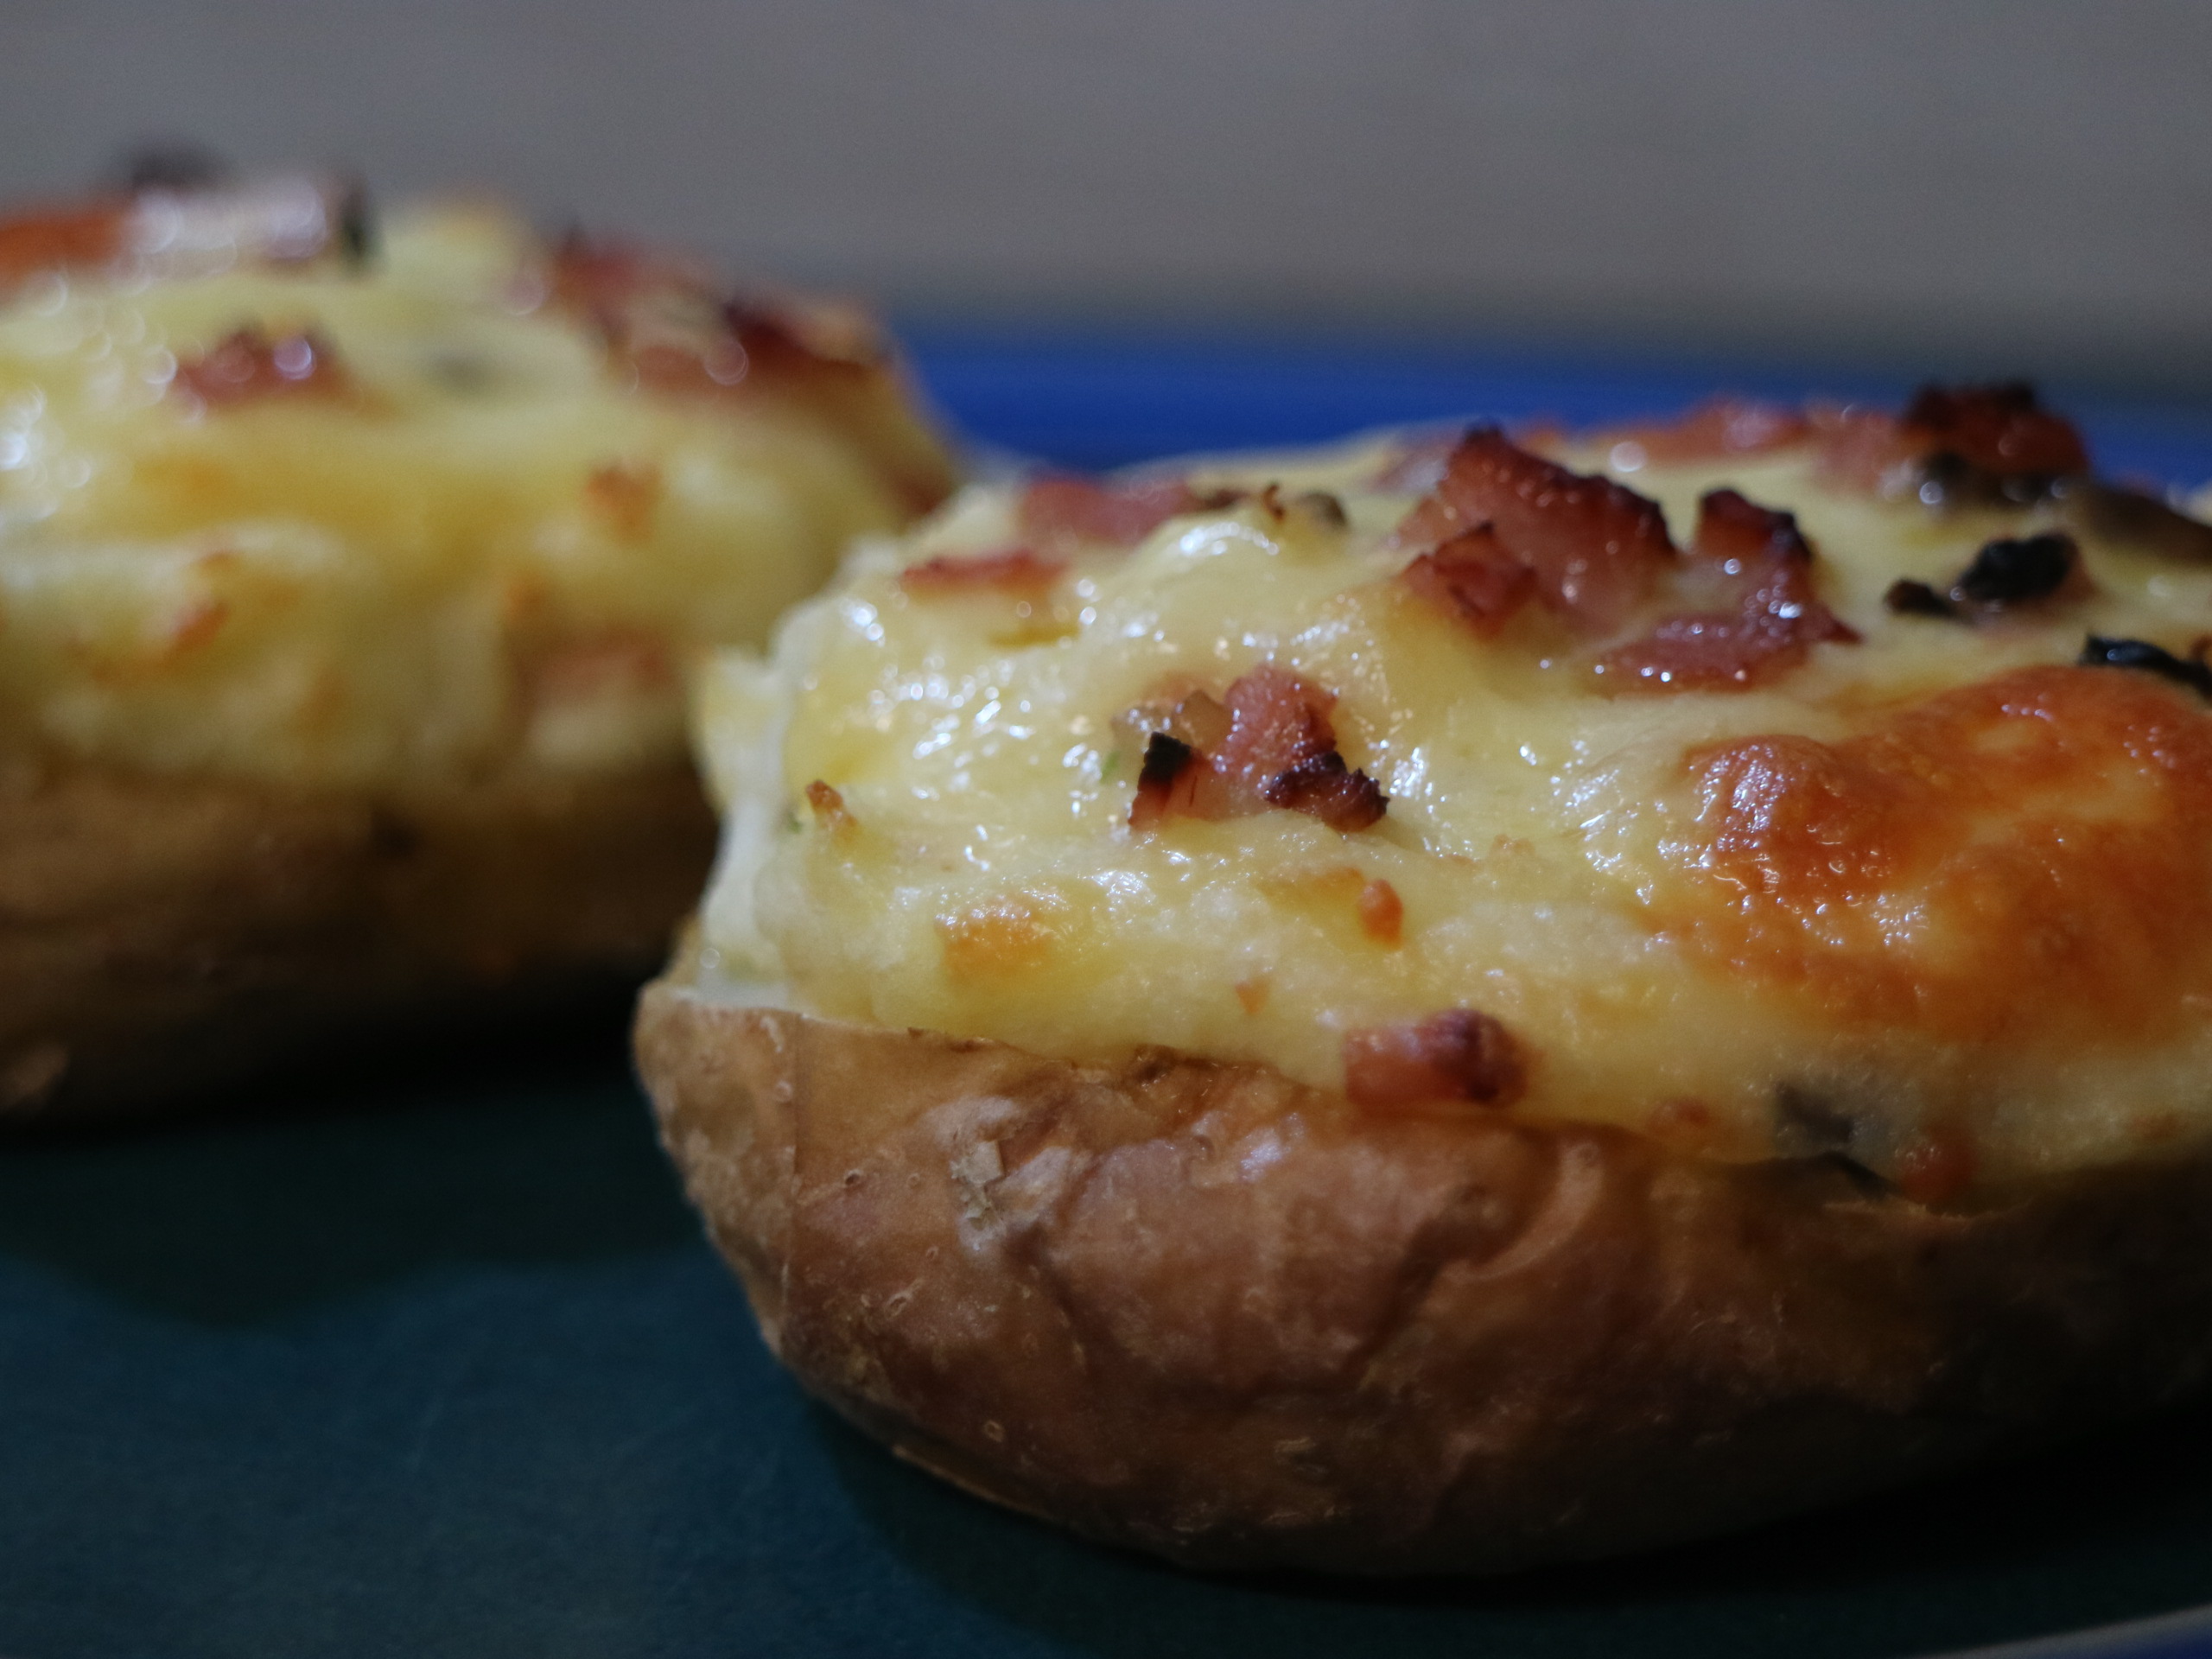 Stuffed Potatoes with a Cheese and Bacon Filling